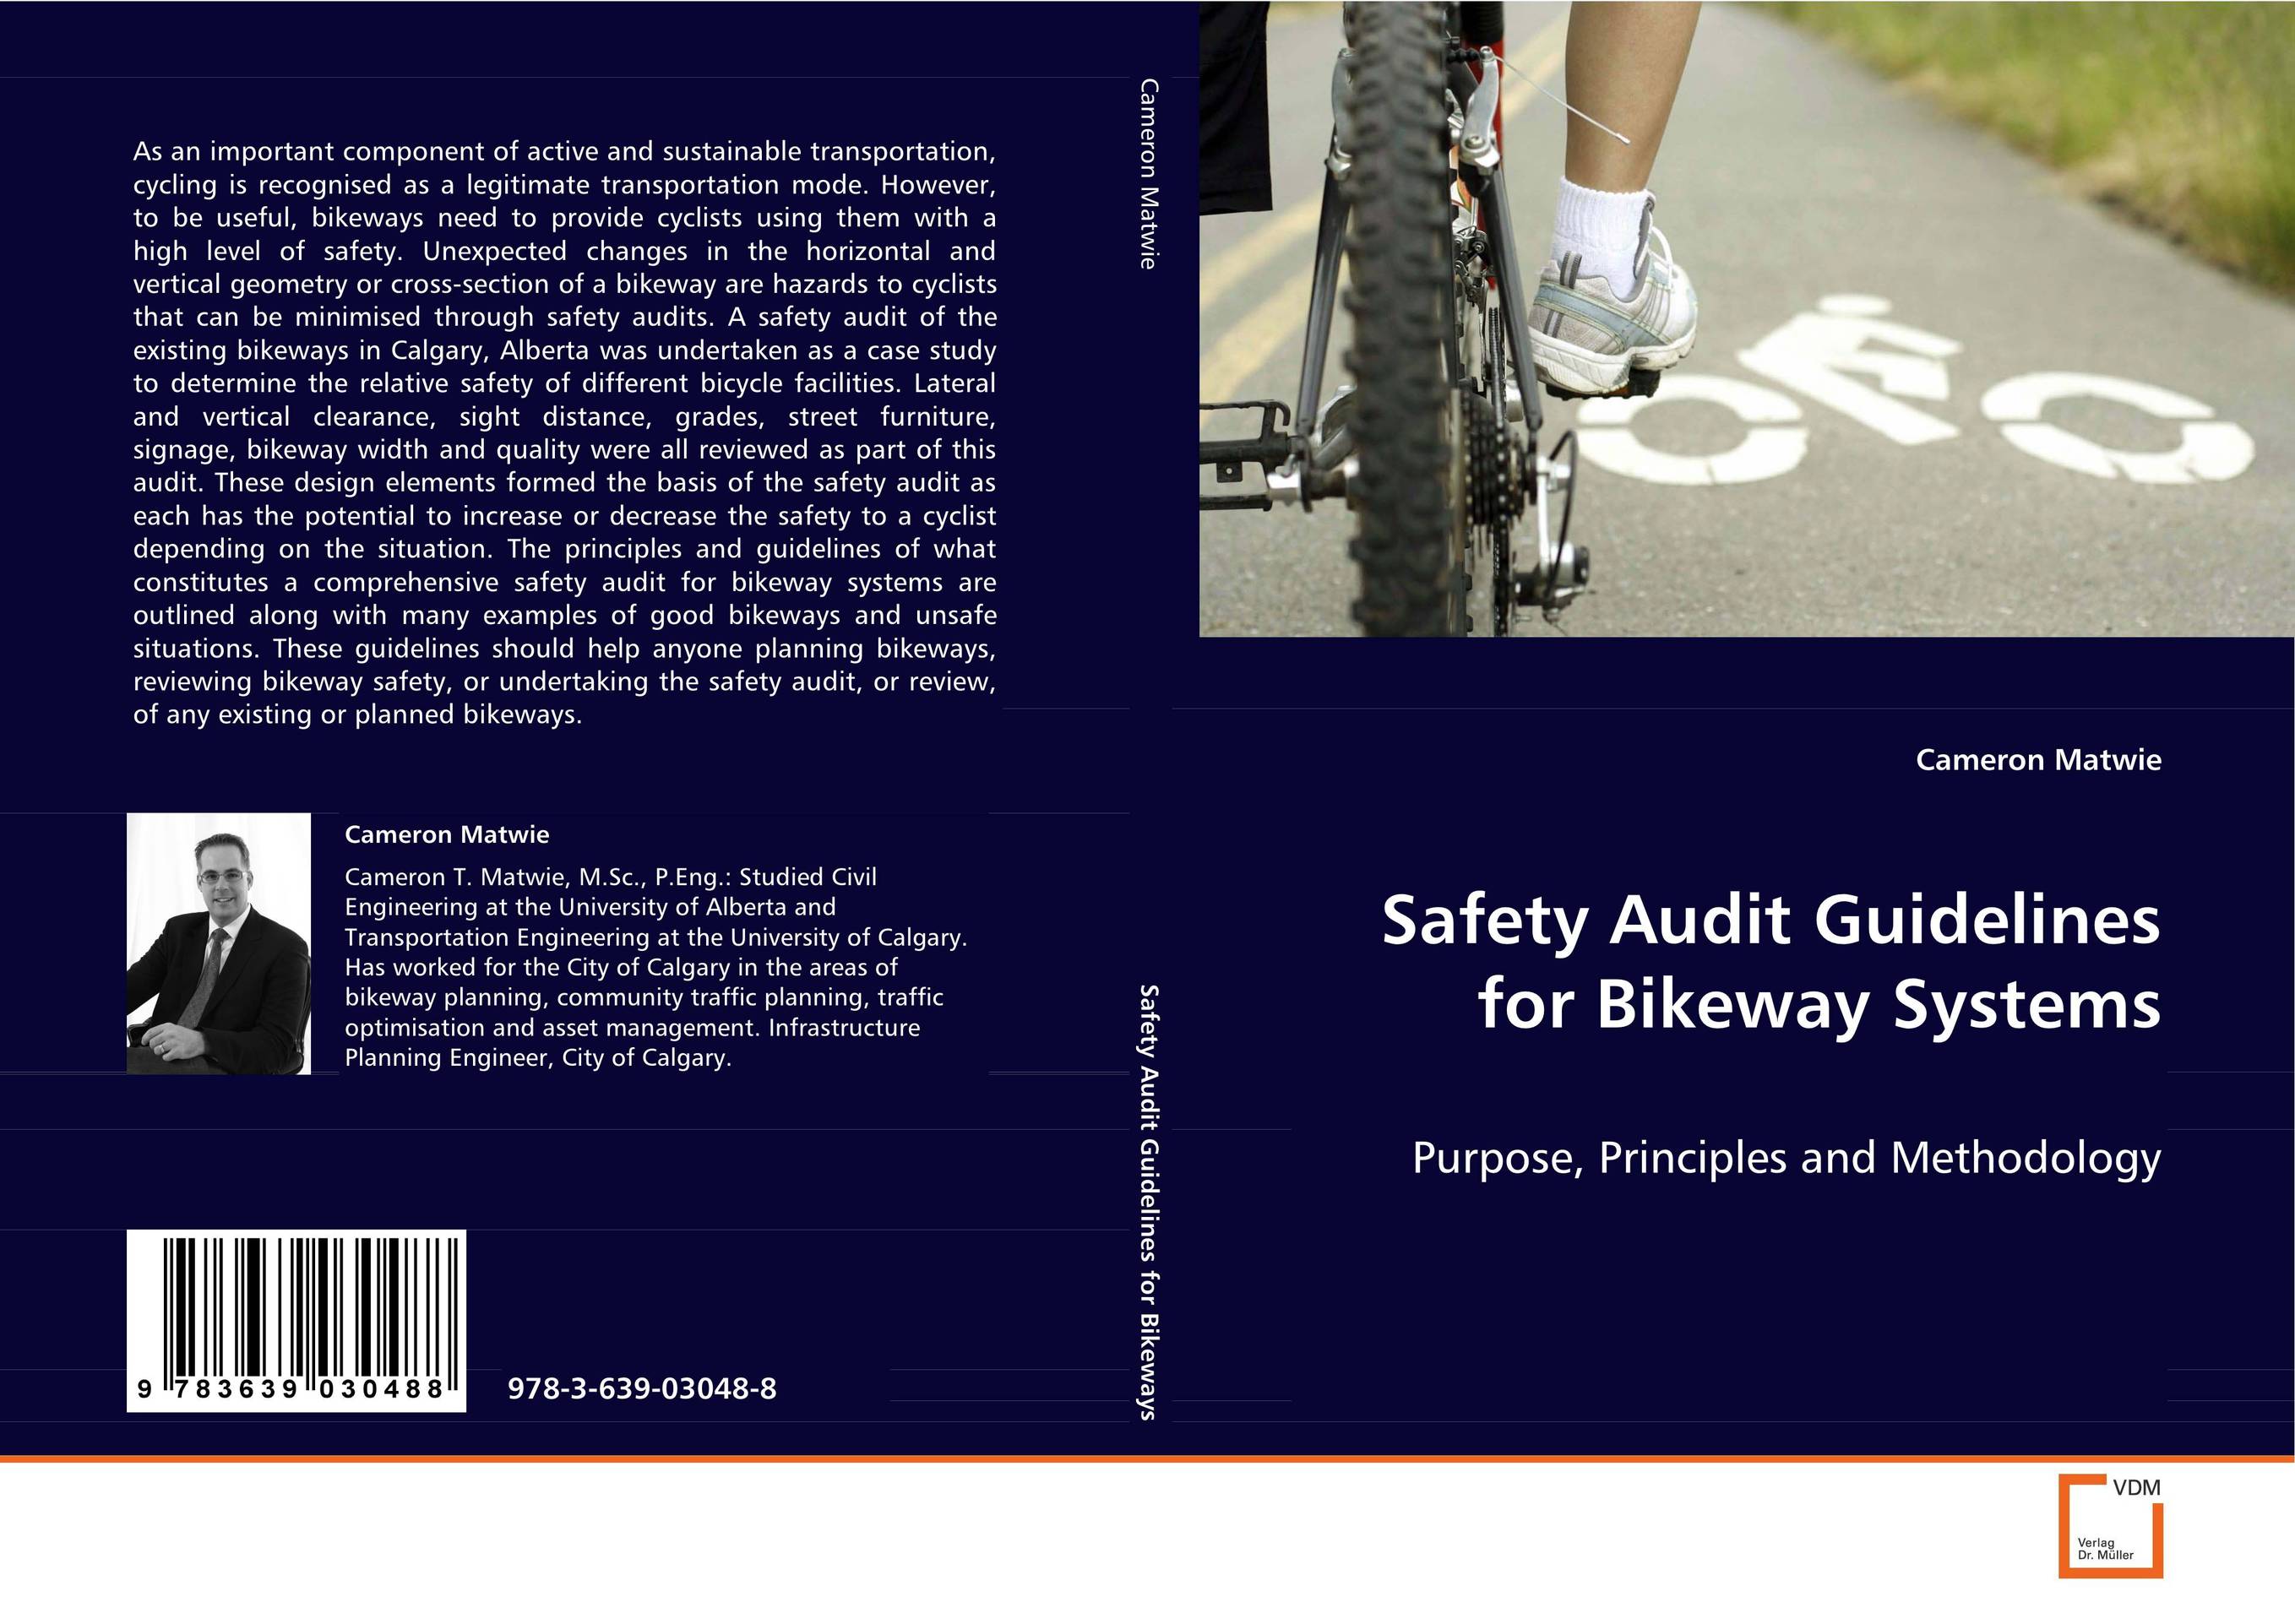 Safety Audit Guidelines for Bikeway Systems